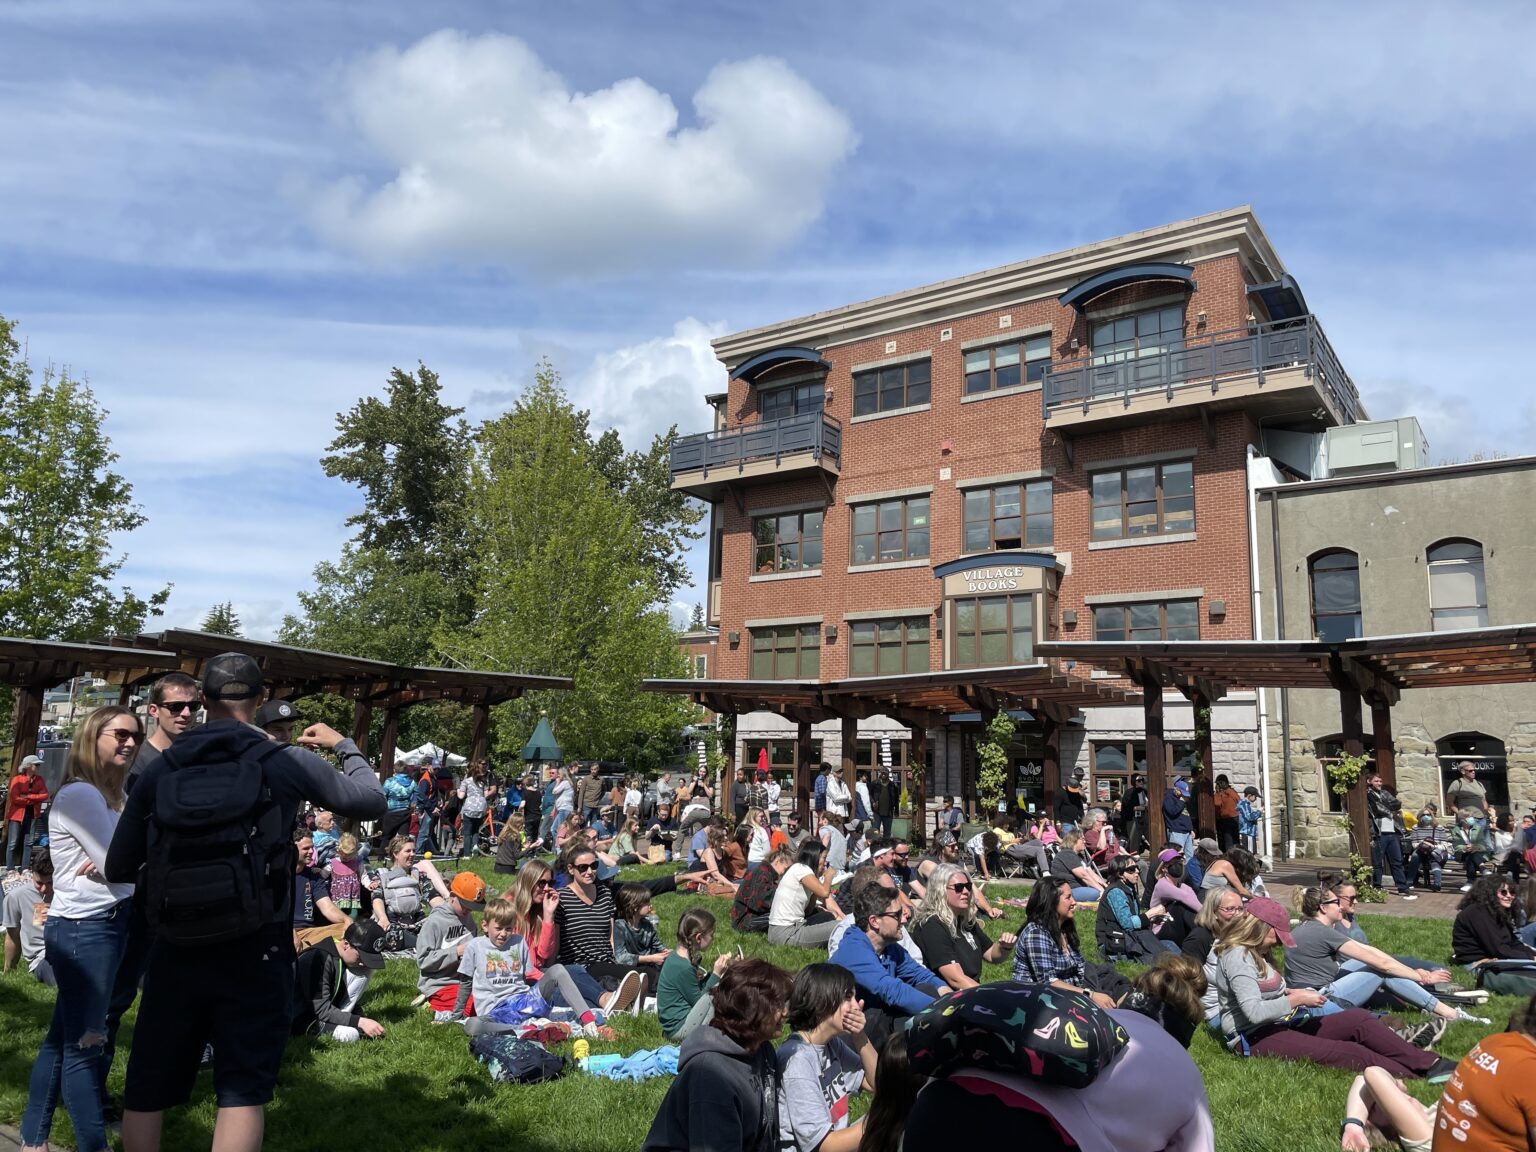 Folks gather at the Fairhaven Village Green for 2022's Fairhaven Festival